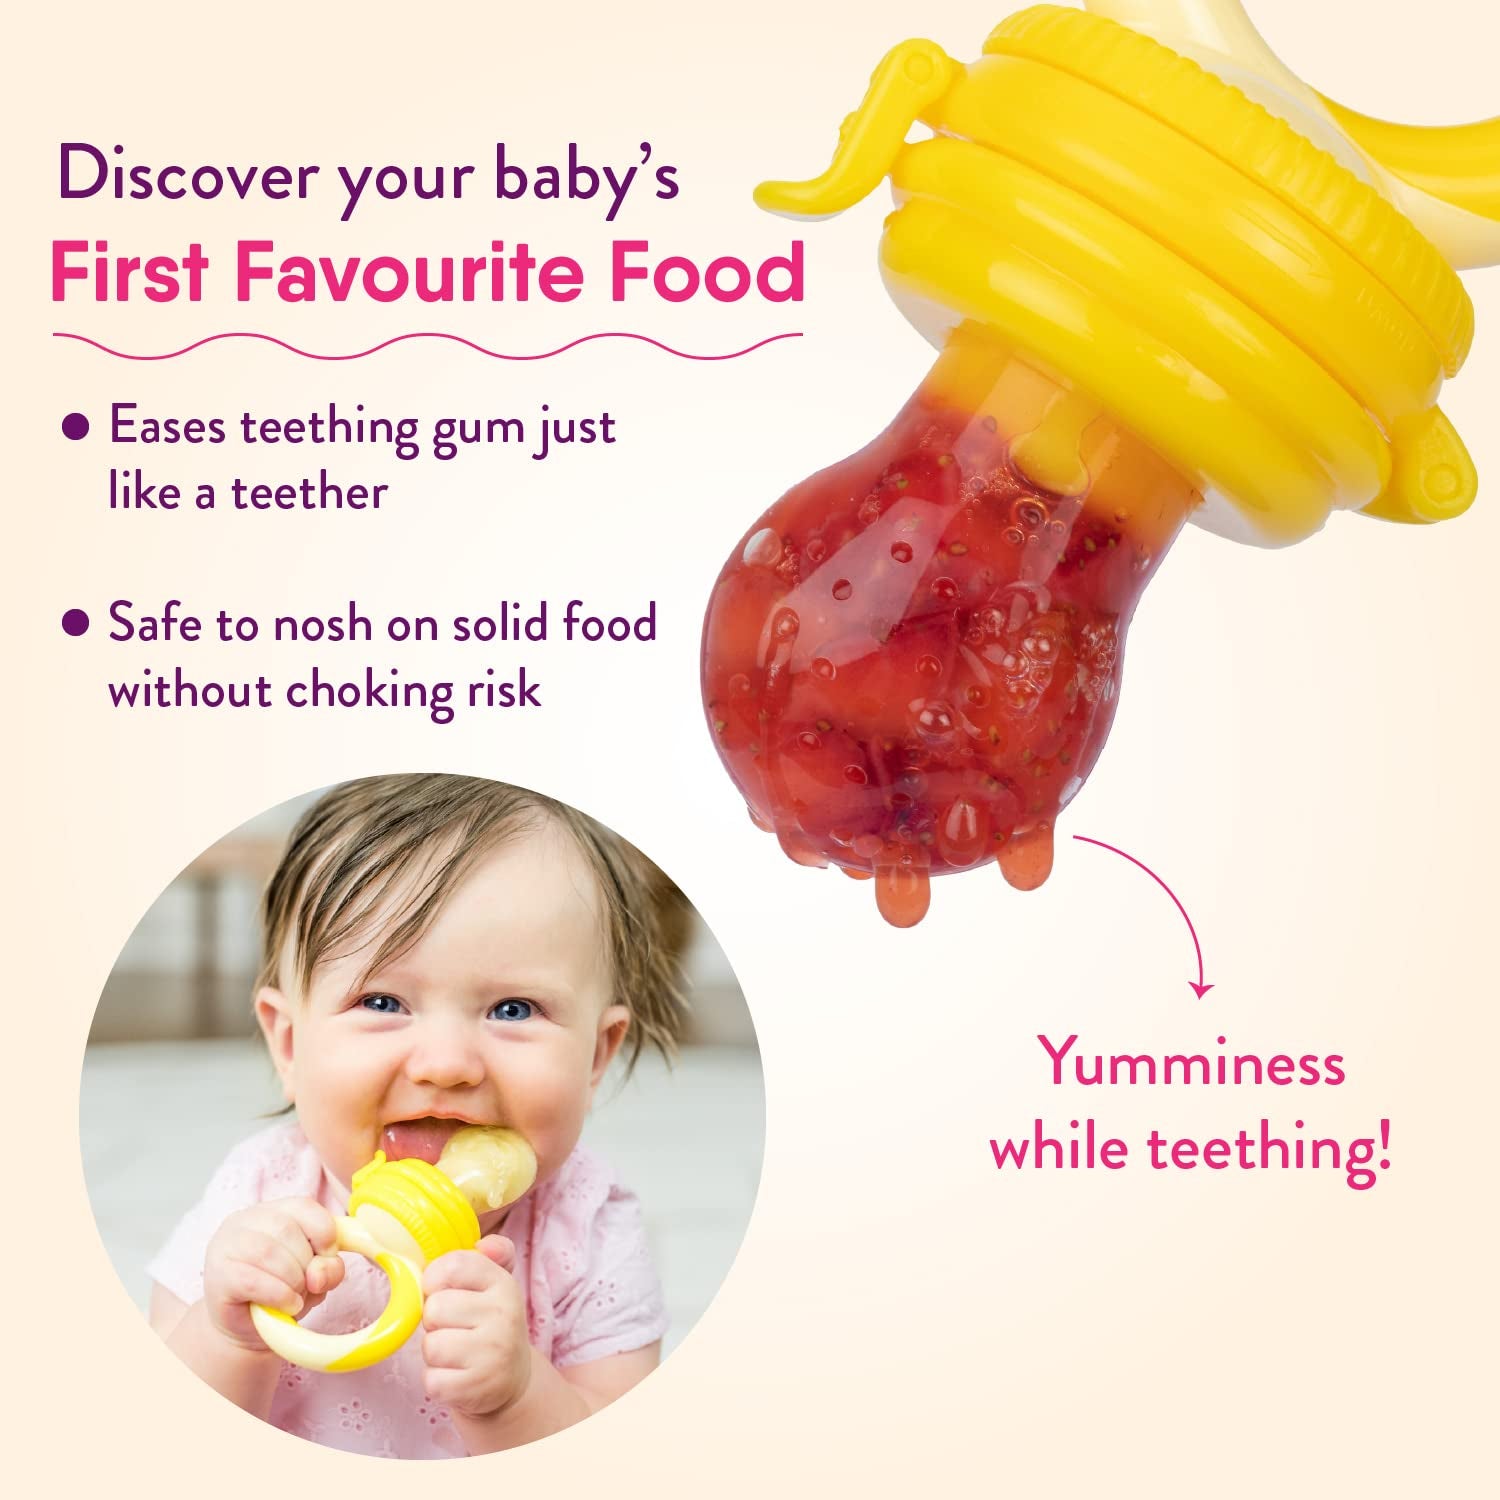 Fruit Feeder Pacifier Nibbler (2 Pack) with Additional Silicone Sacs